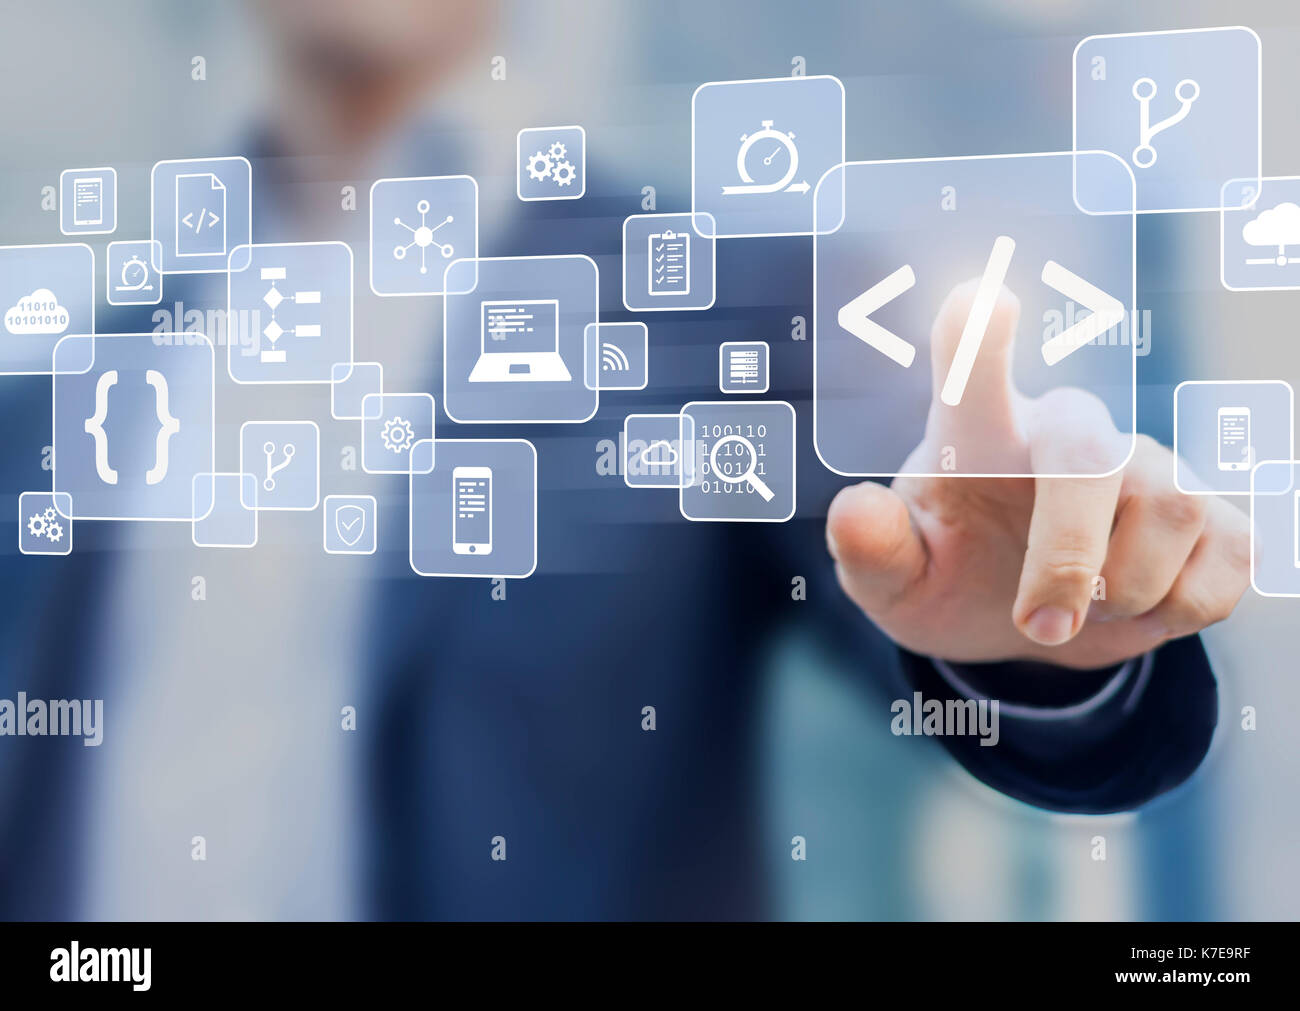 Coding concept with software developer touching code symbol and icons Stock Photo